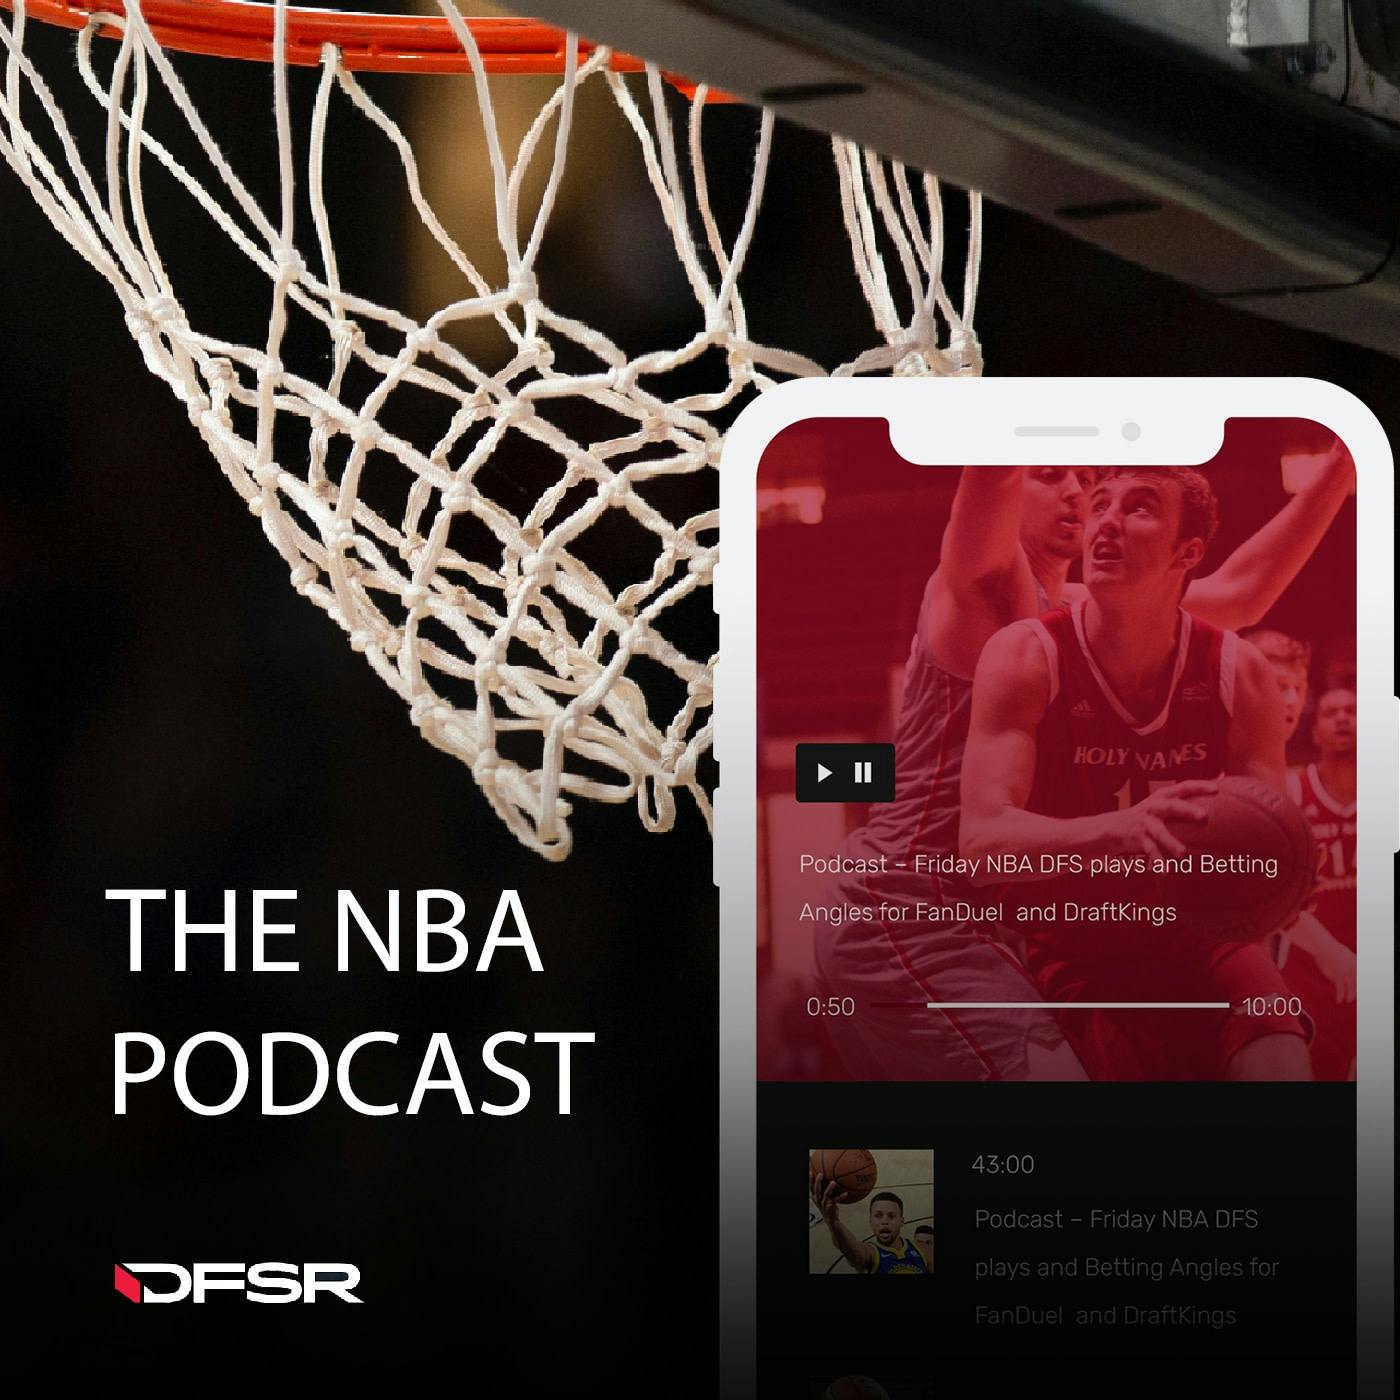 DFS NBA Podcast for FanDuel and DraftKings - 11/7/18